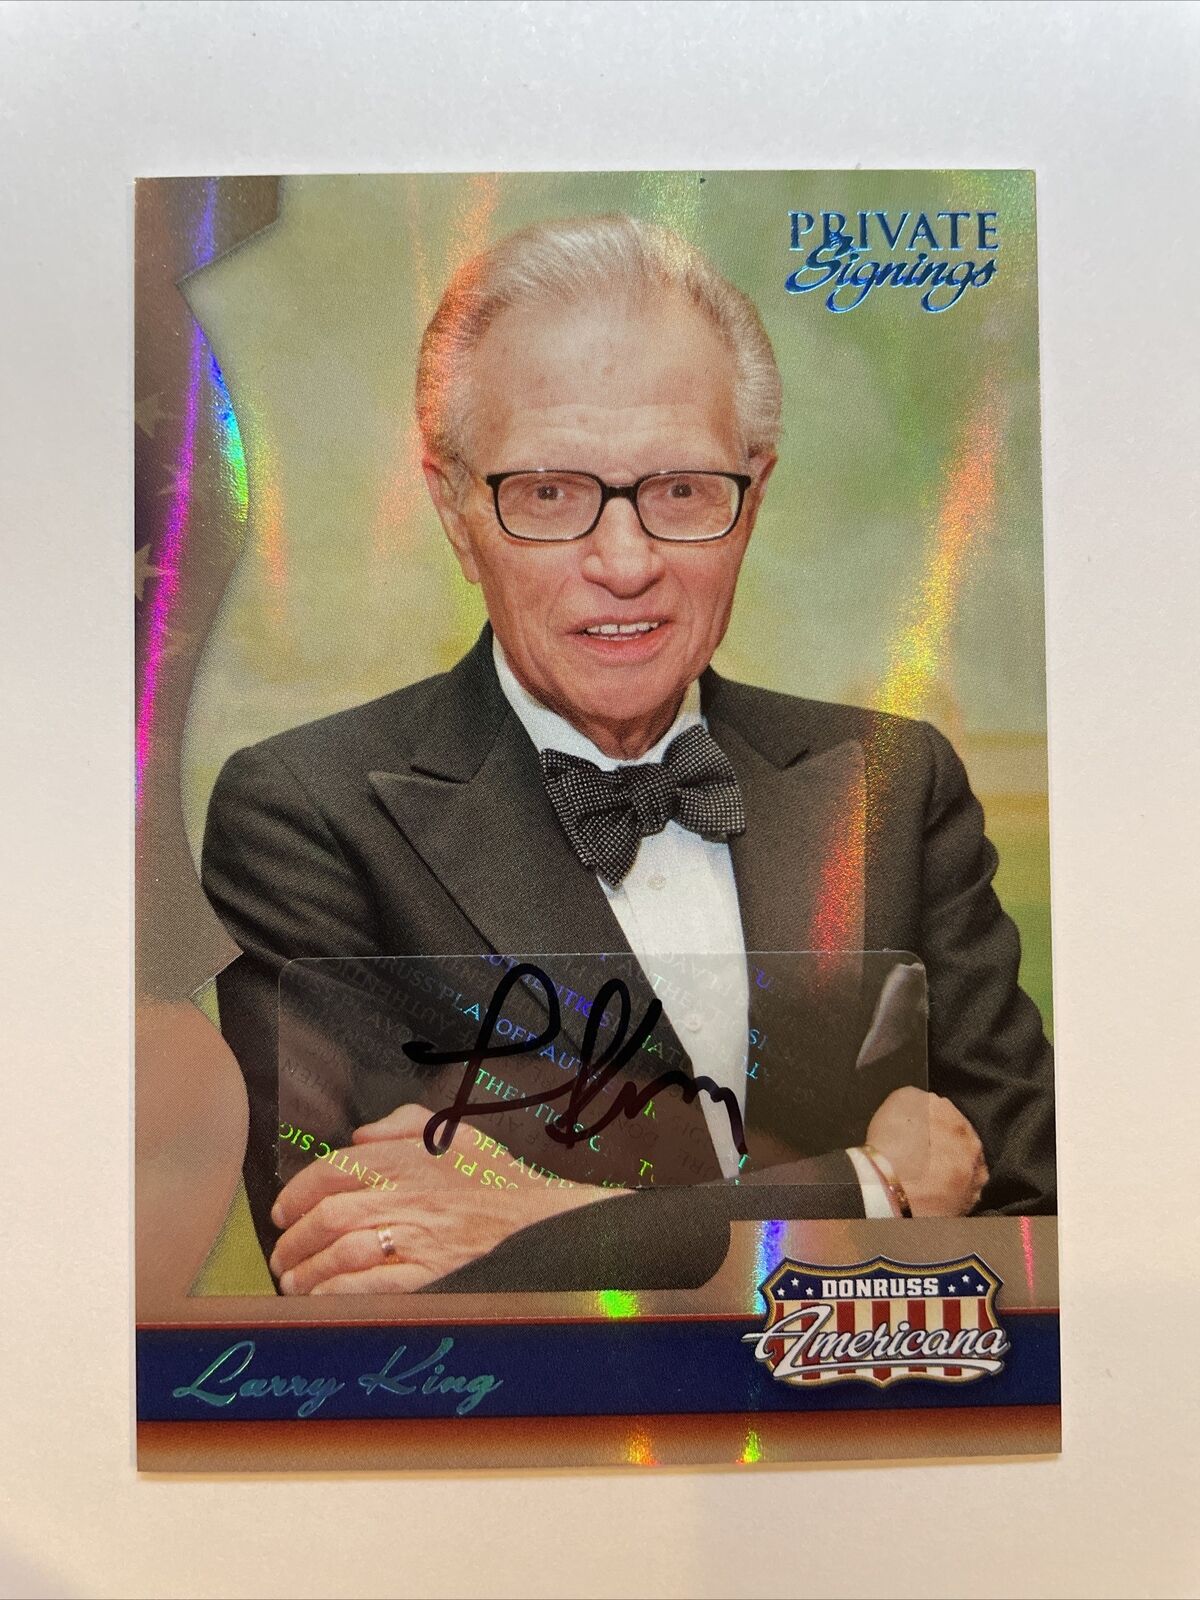 2007 Donruss Americana Private Signings Larry King Autograph #/200